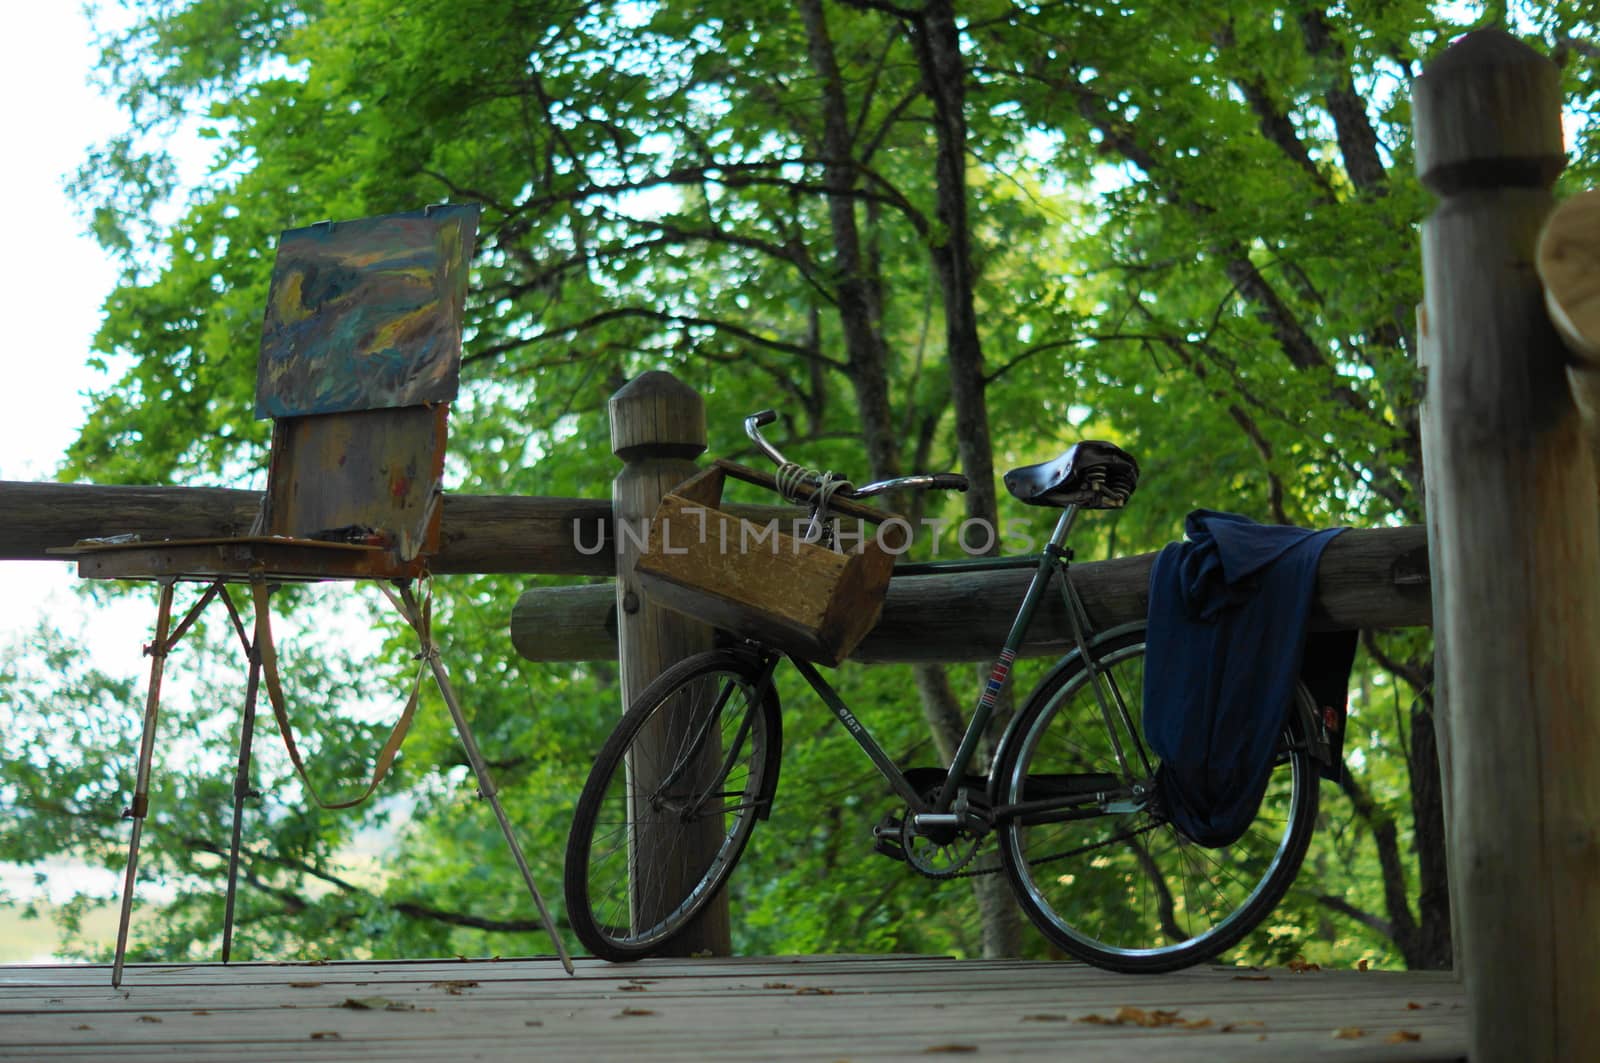 Painting canvas on tripod under tree by celaler